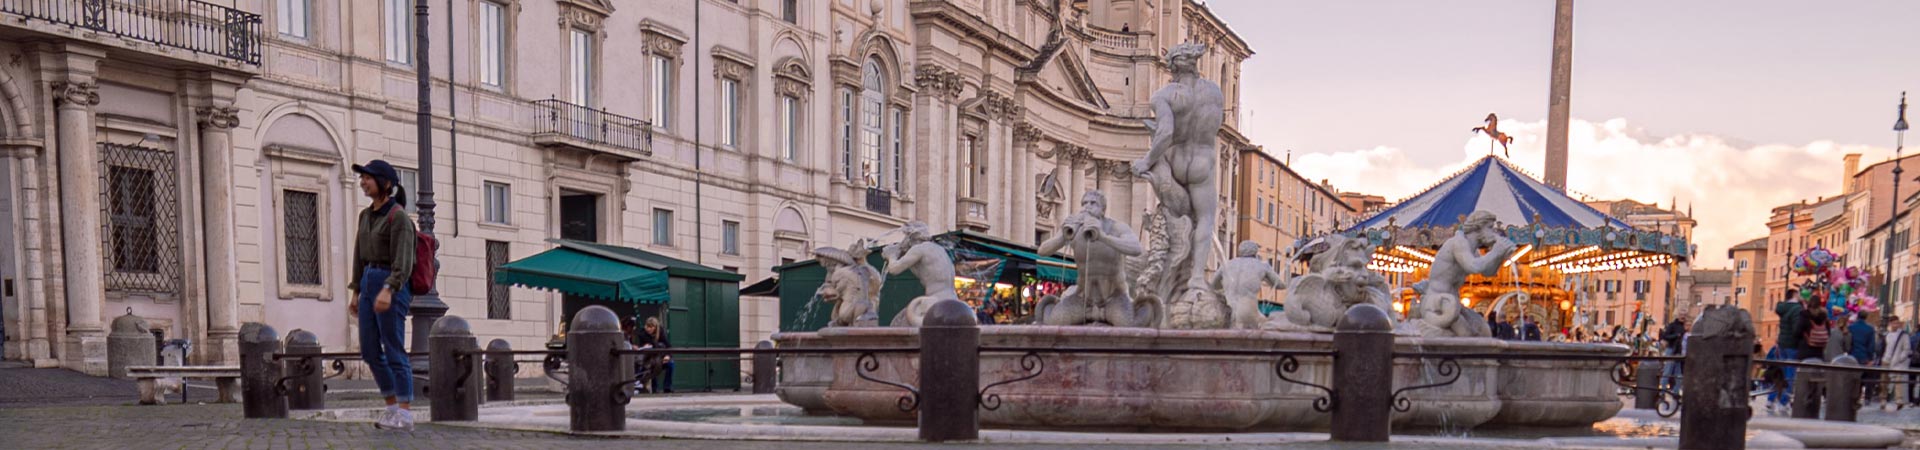 fountain in piazza navona best of rome